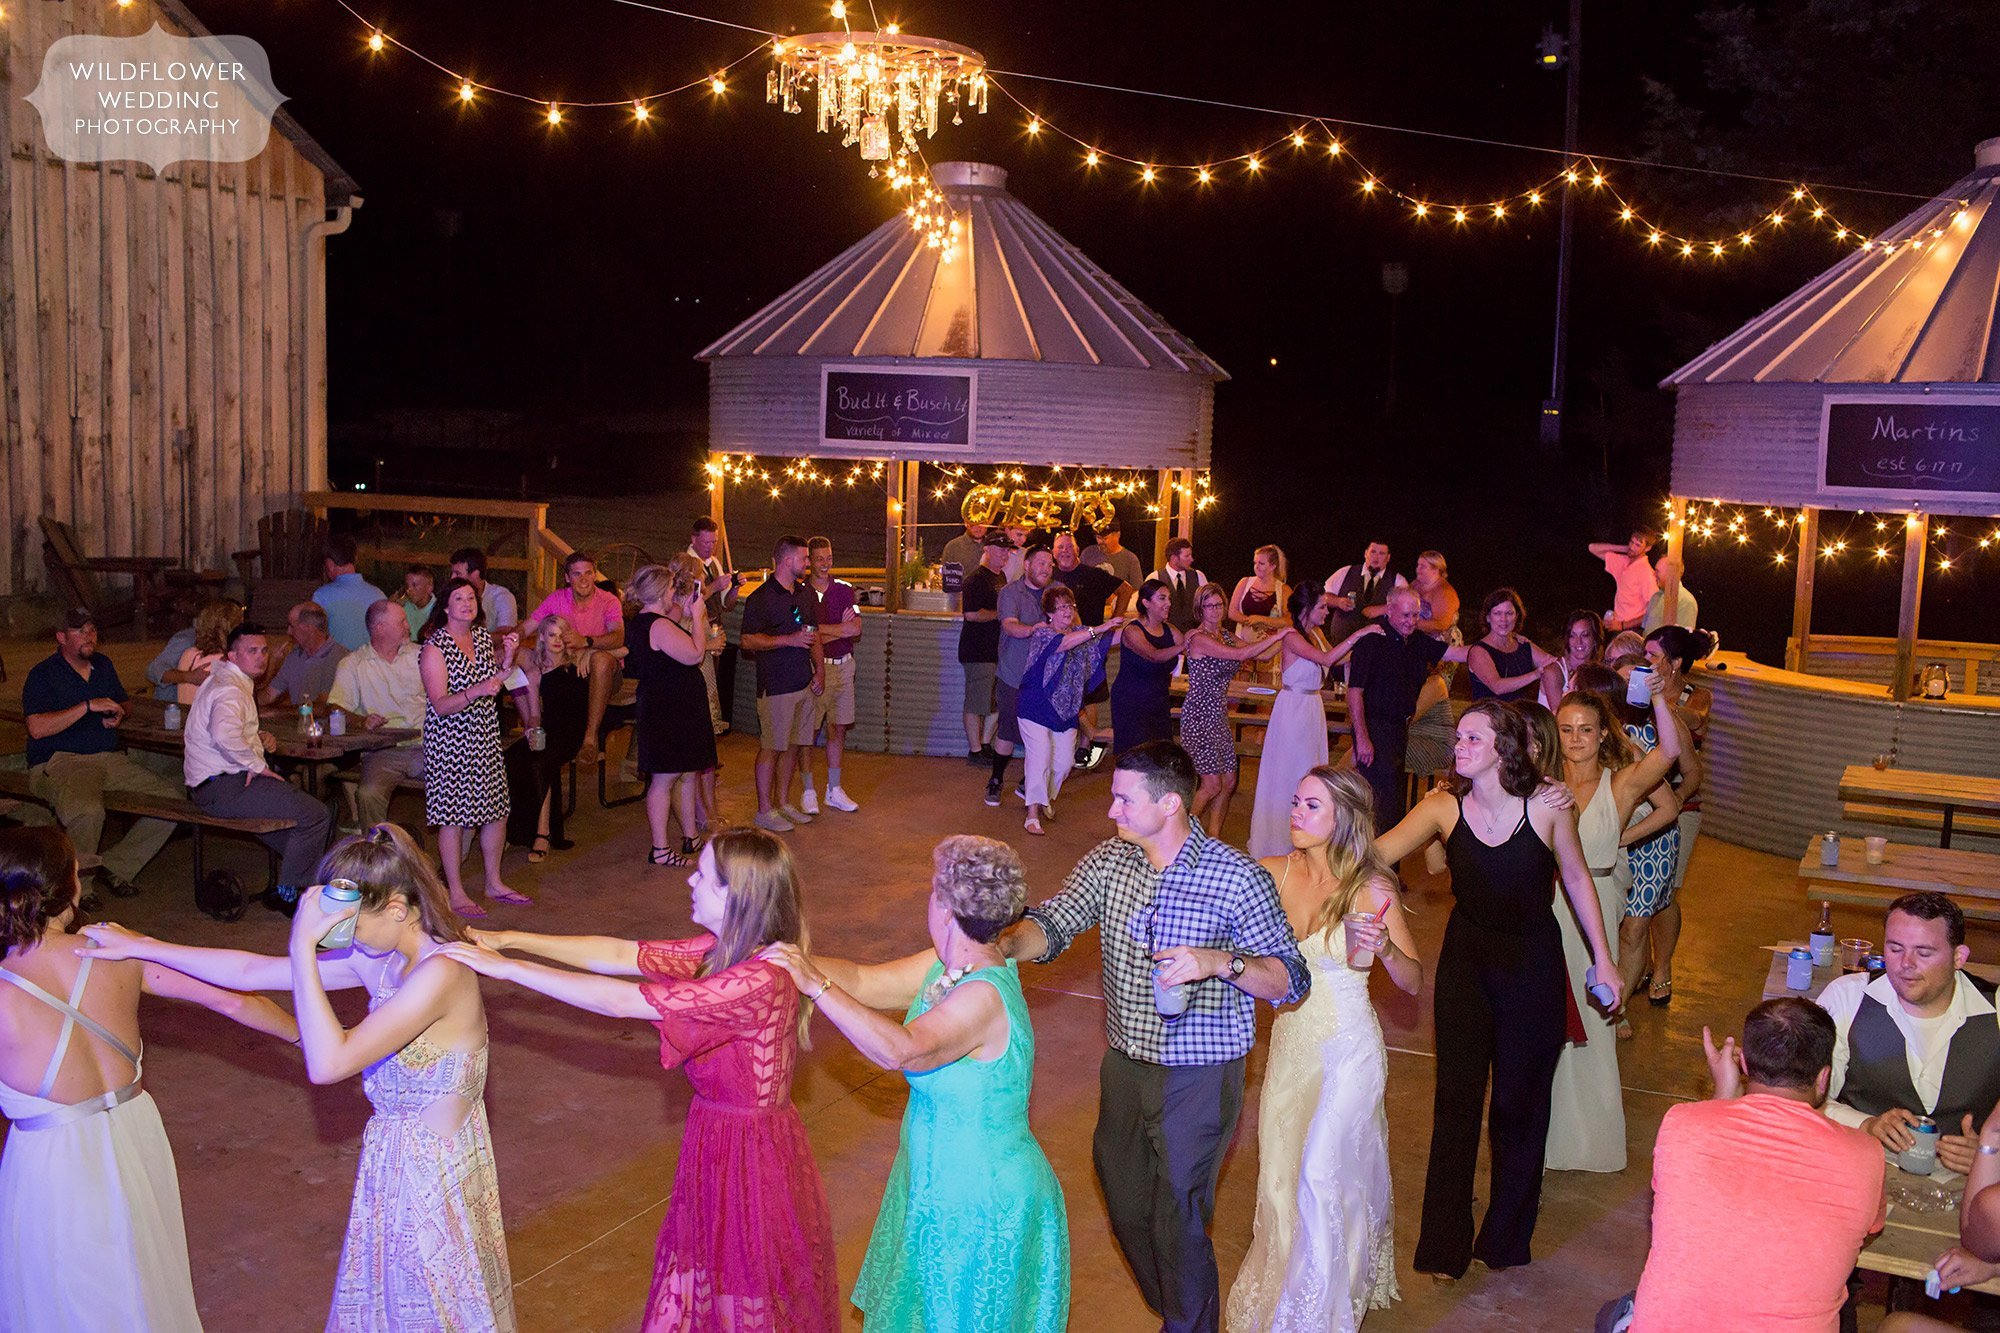 Wedding guests form a conga line on the outdoor dance patio at this barn venue in MO.